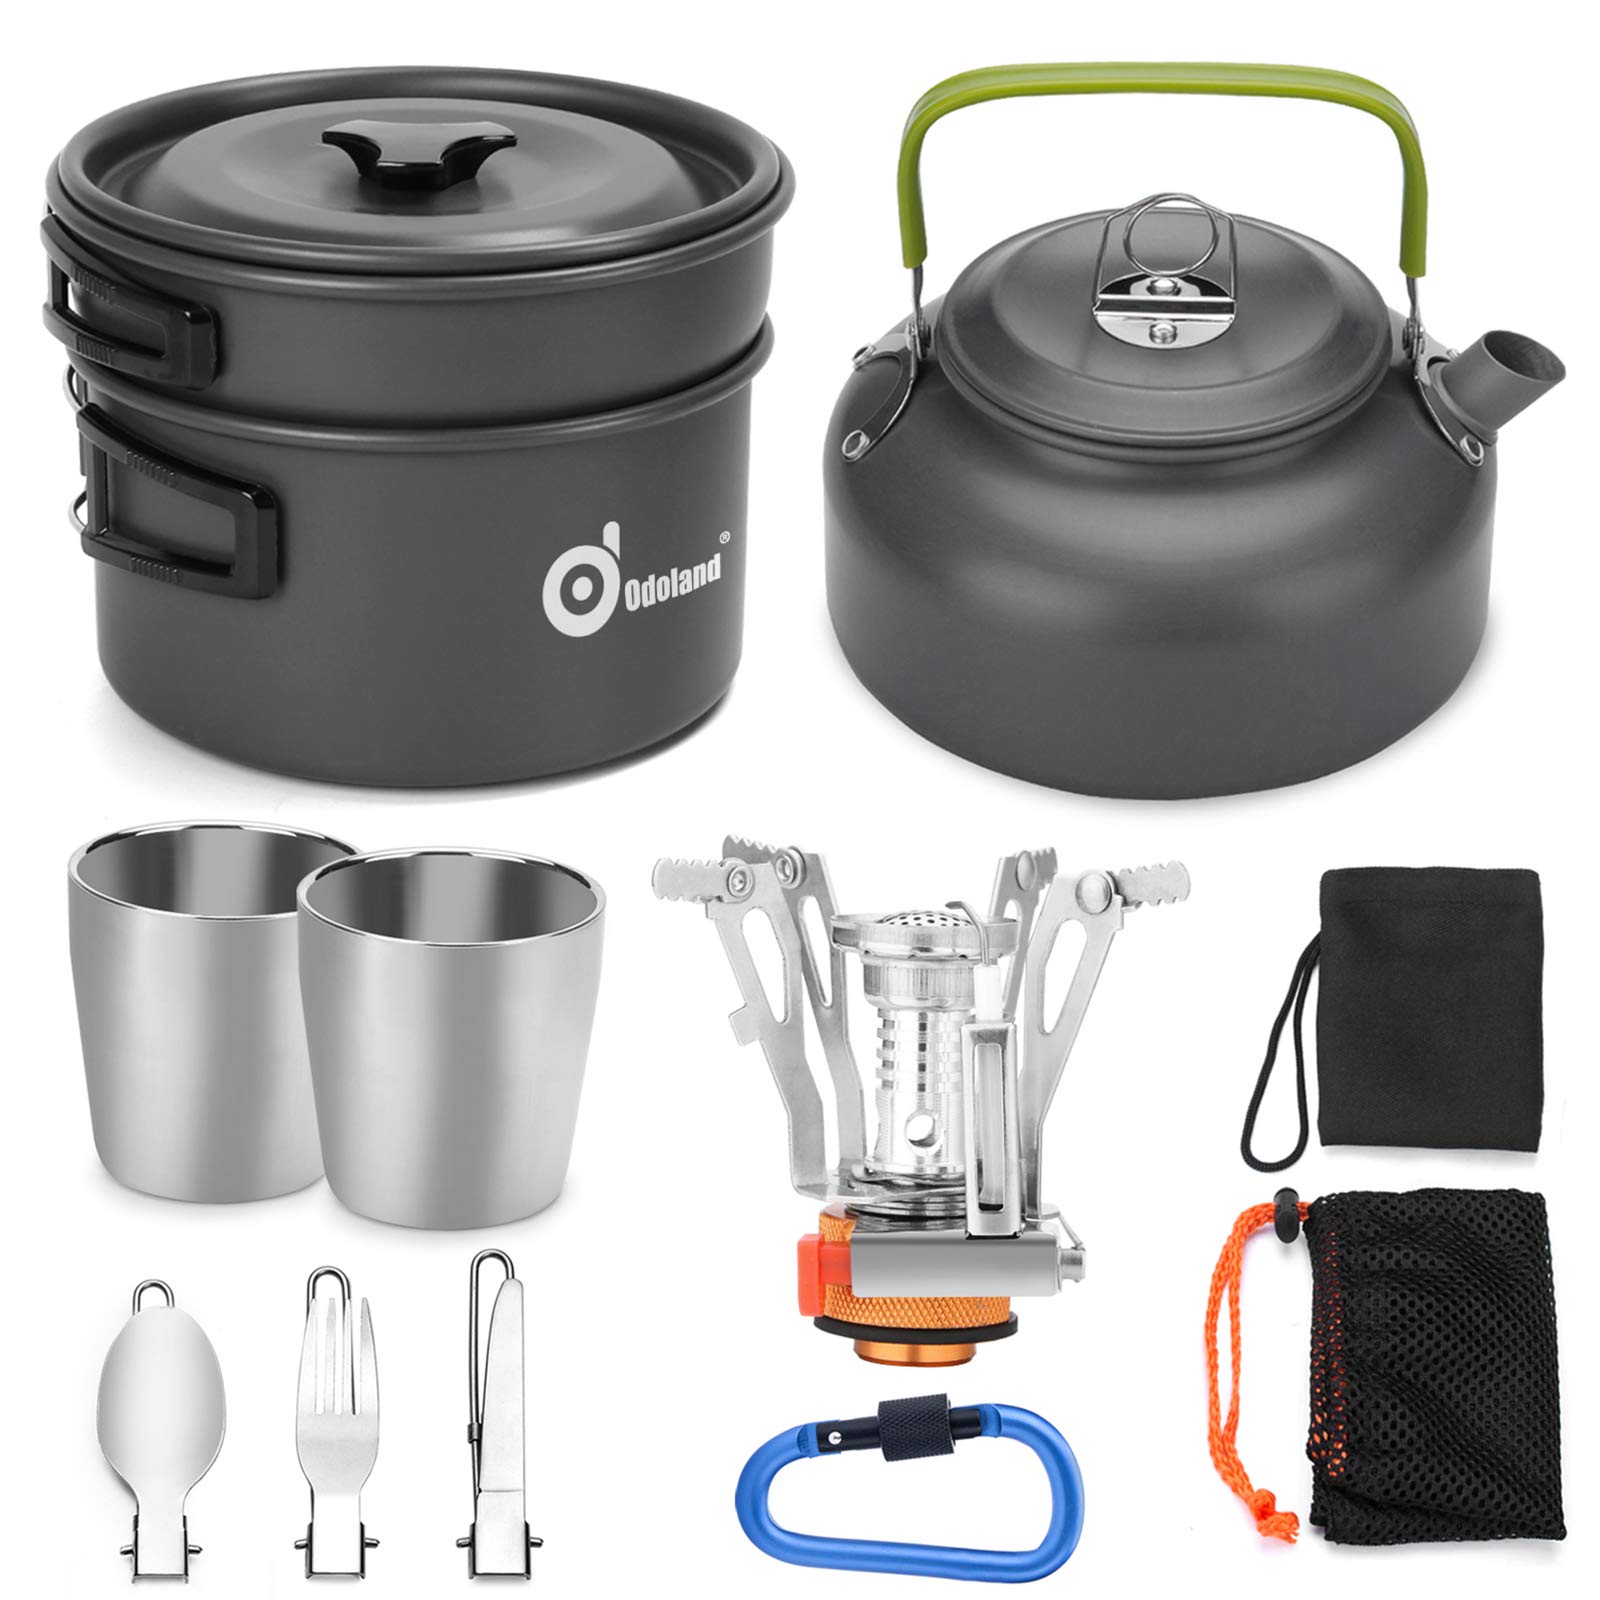 Odoland 12pcs Camping Cookware Mess Kit with Mini Stove Lightweight Pot Pan  Kettle with 2 Cups